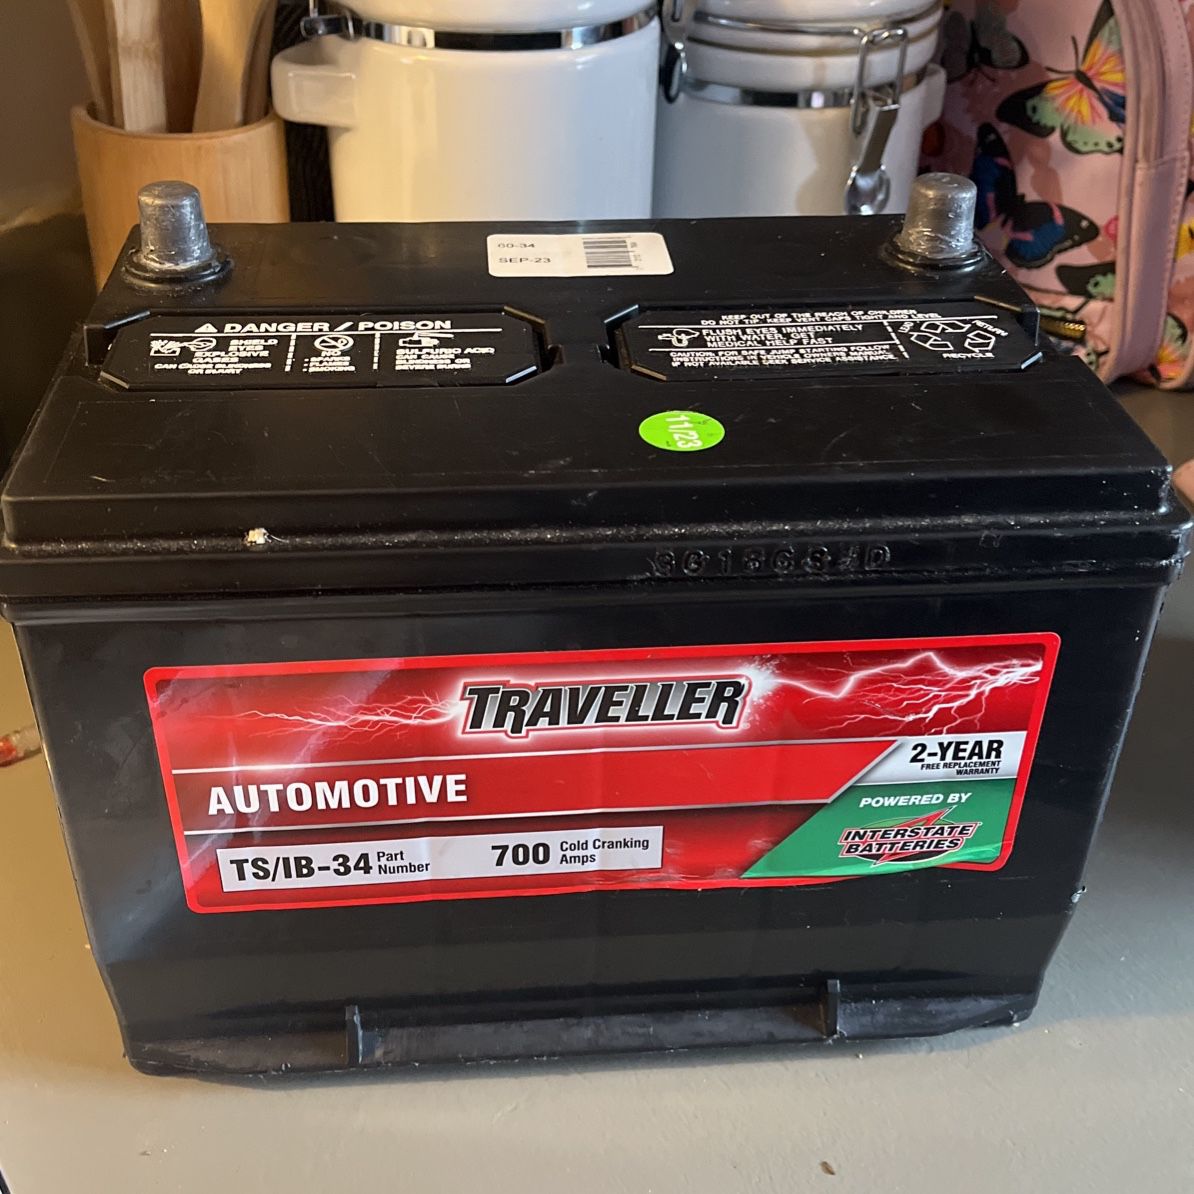 Traveller TS/IB-34 Powered by Interstate Auto Battery IB-34